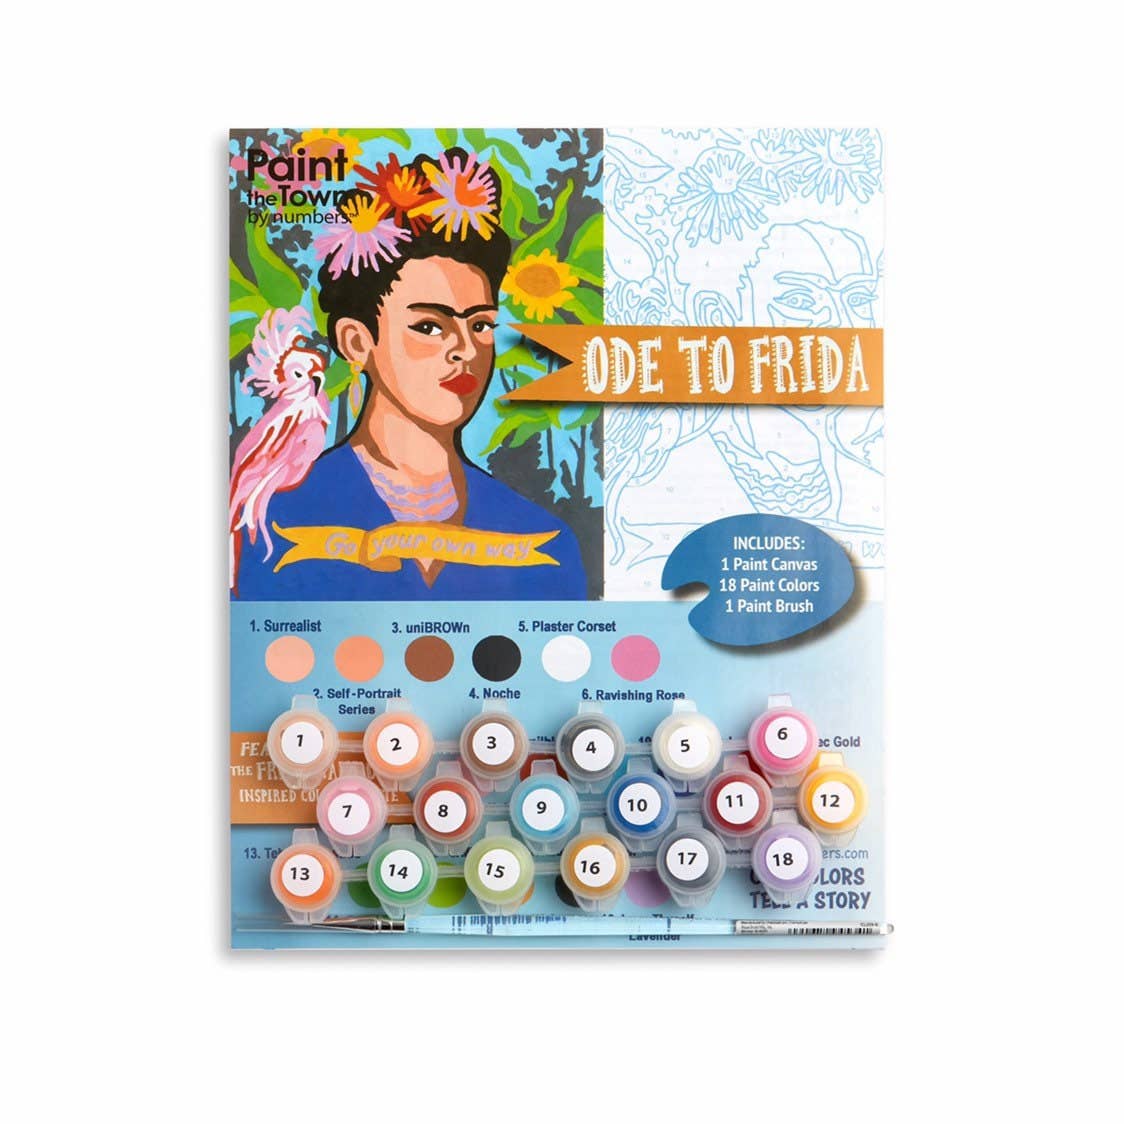 Ode to Frida Kahlo Paint by Number Kit